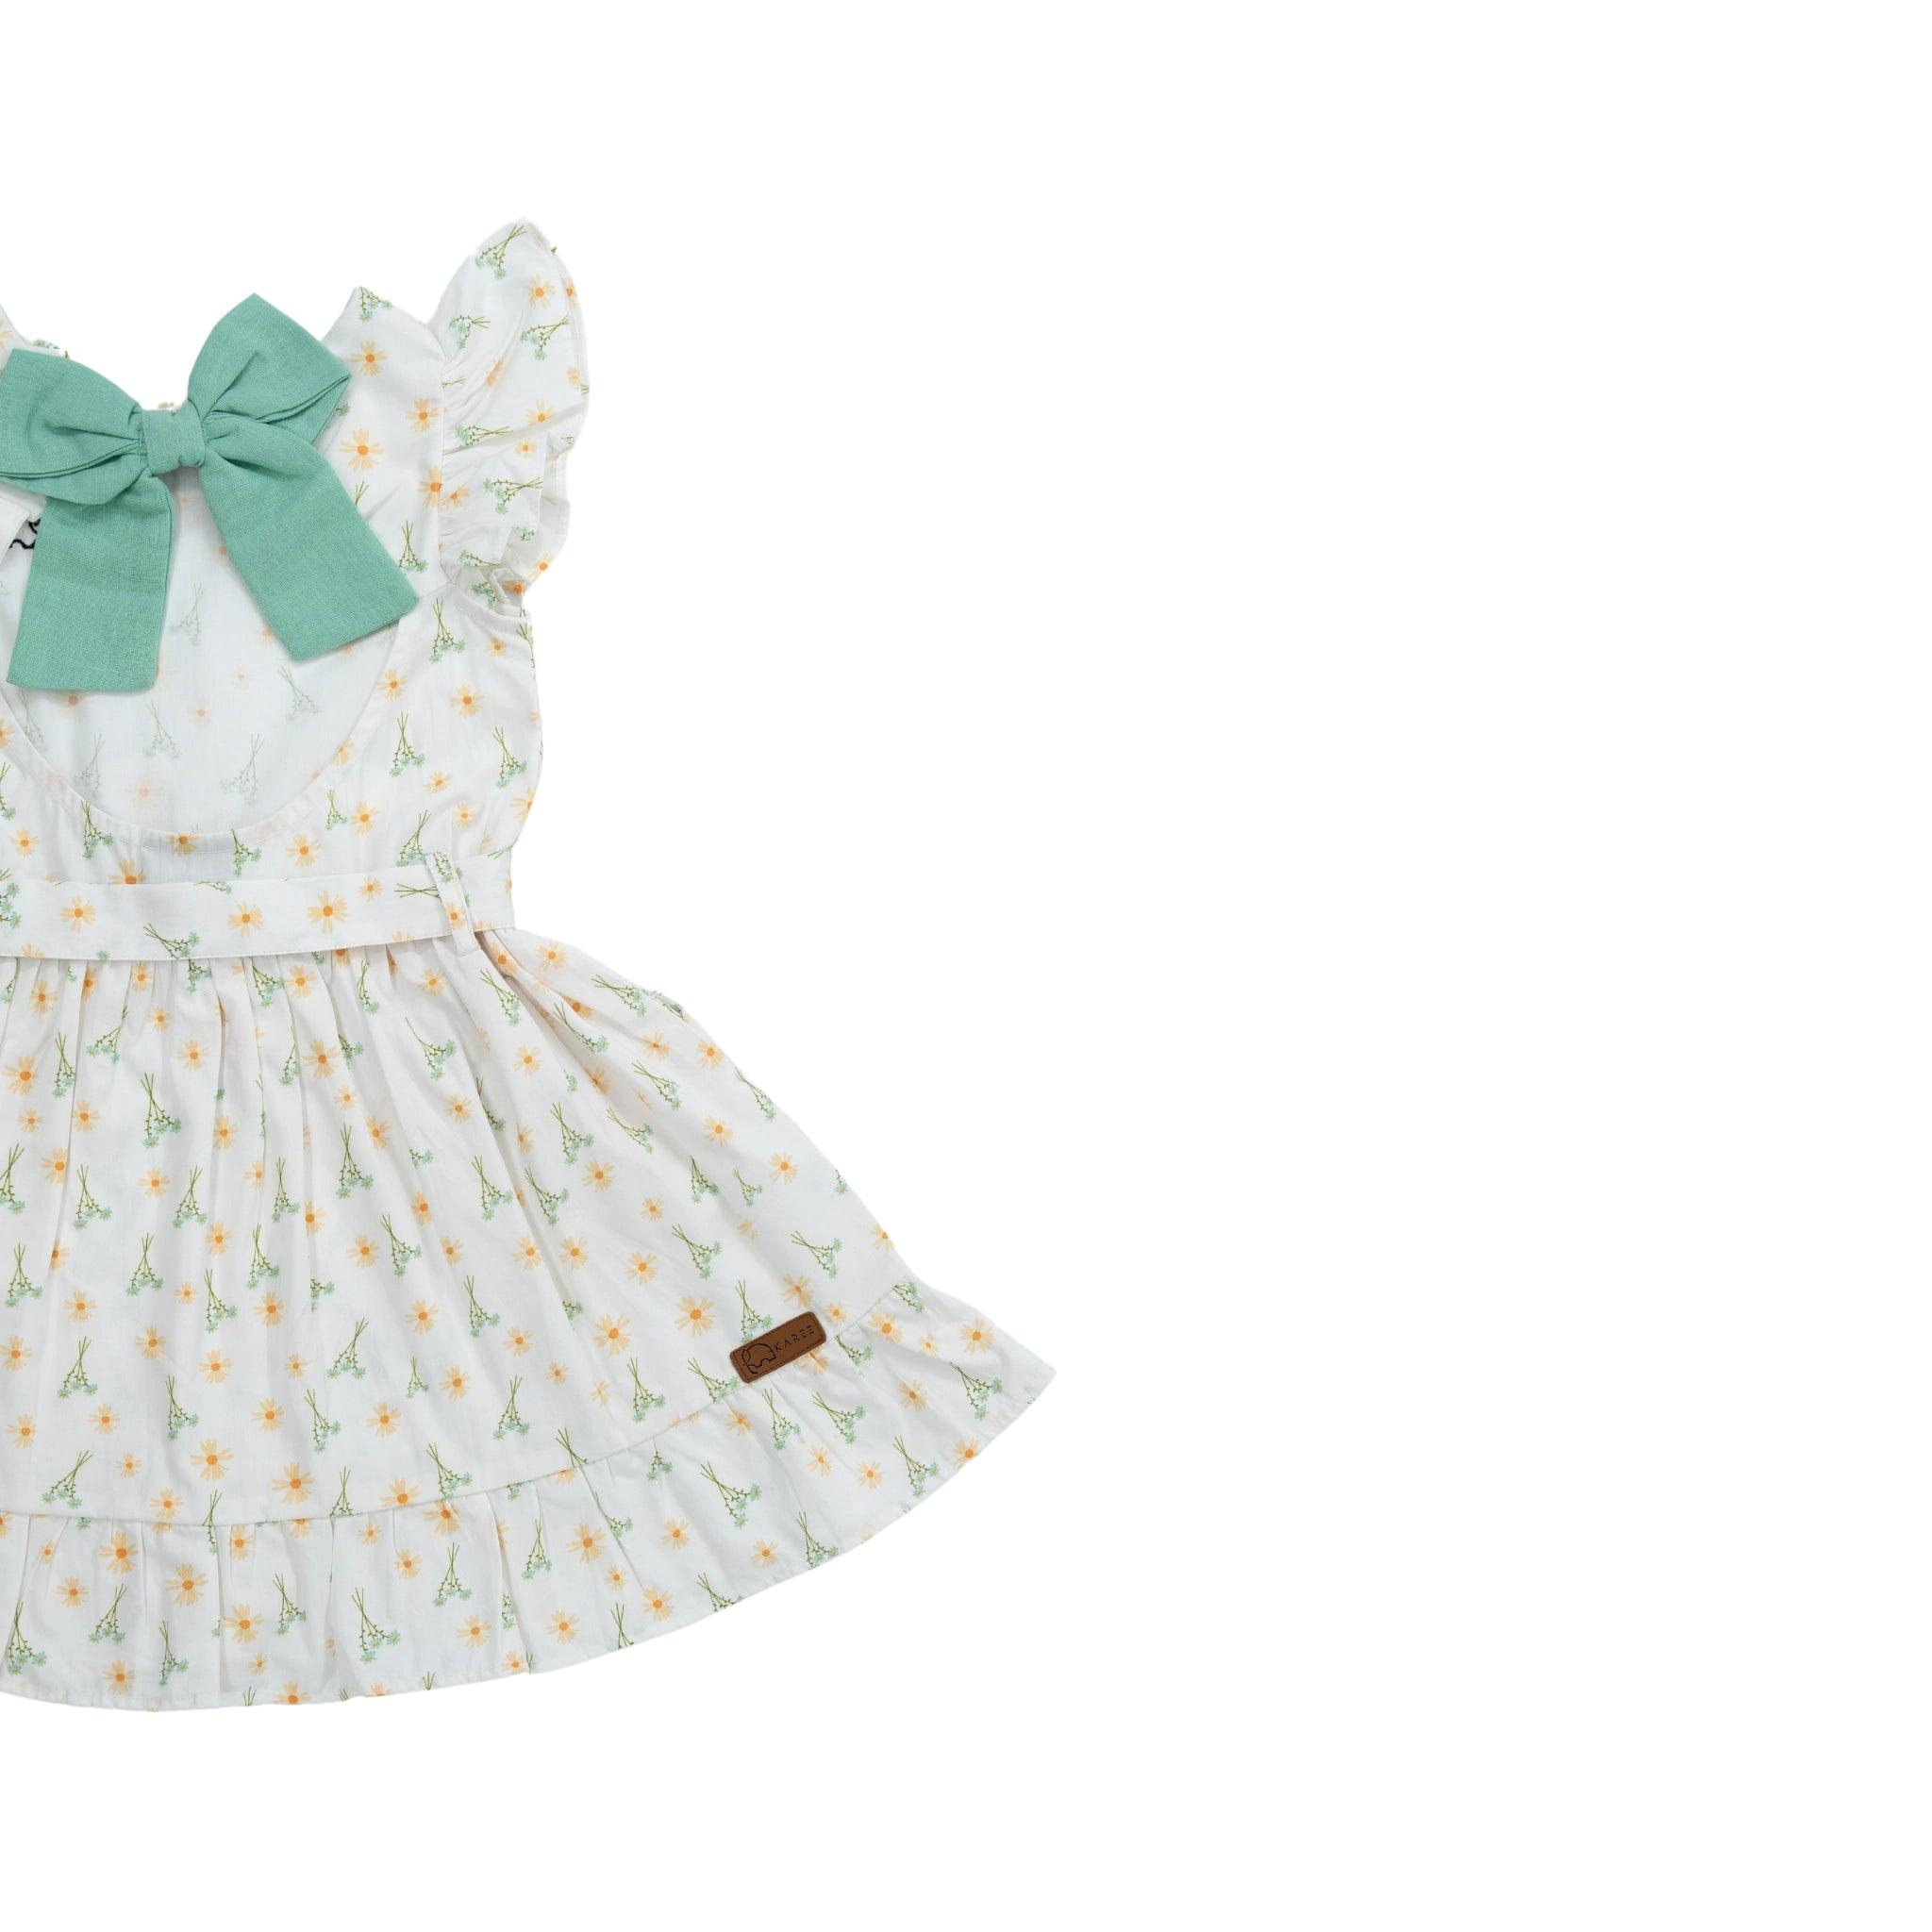 Karee Smoked Pearl Cotton Dress: White floral print toddler dress with a green bow, displayed on a clean, white background.